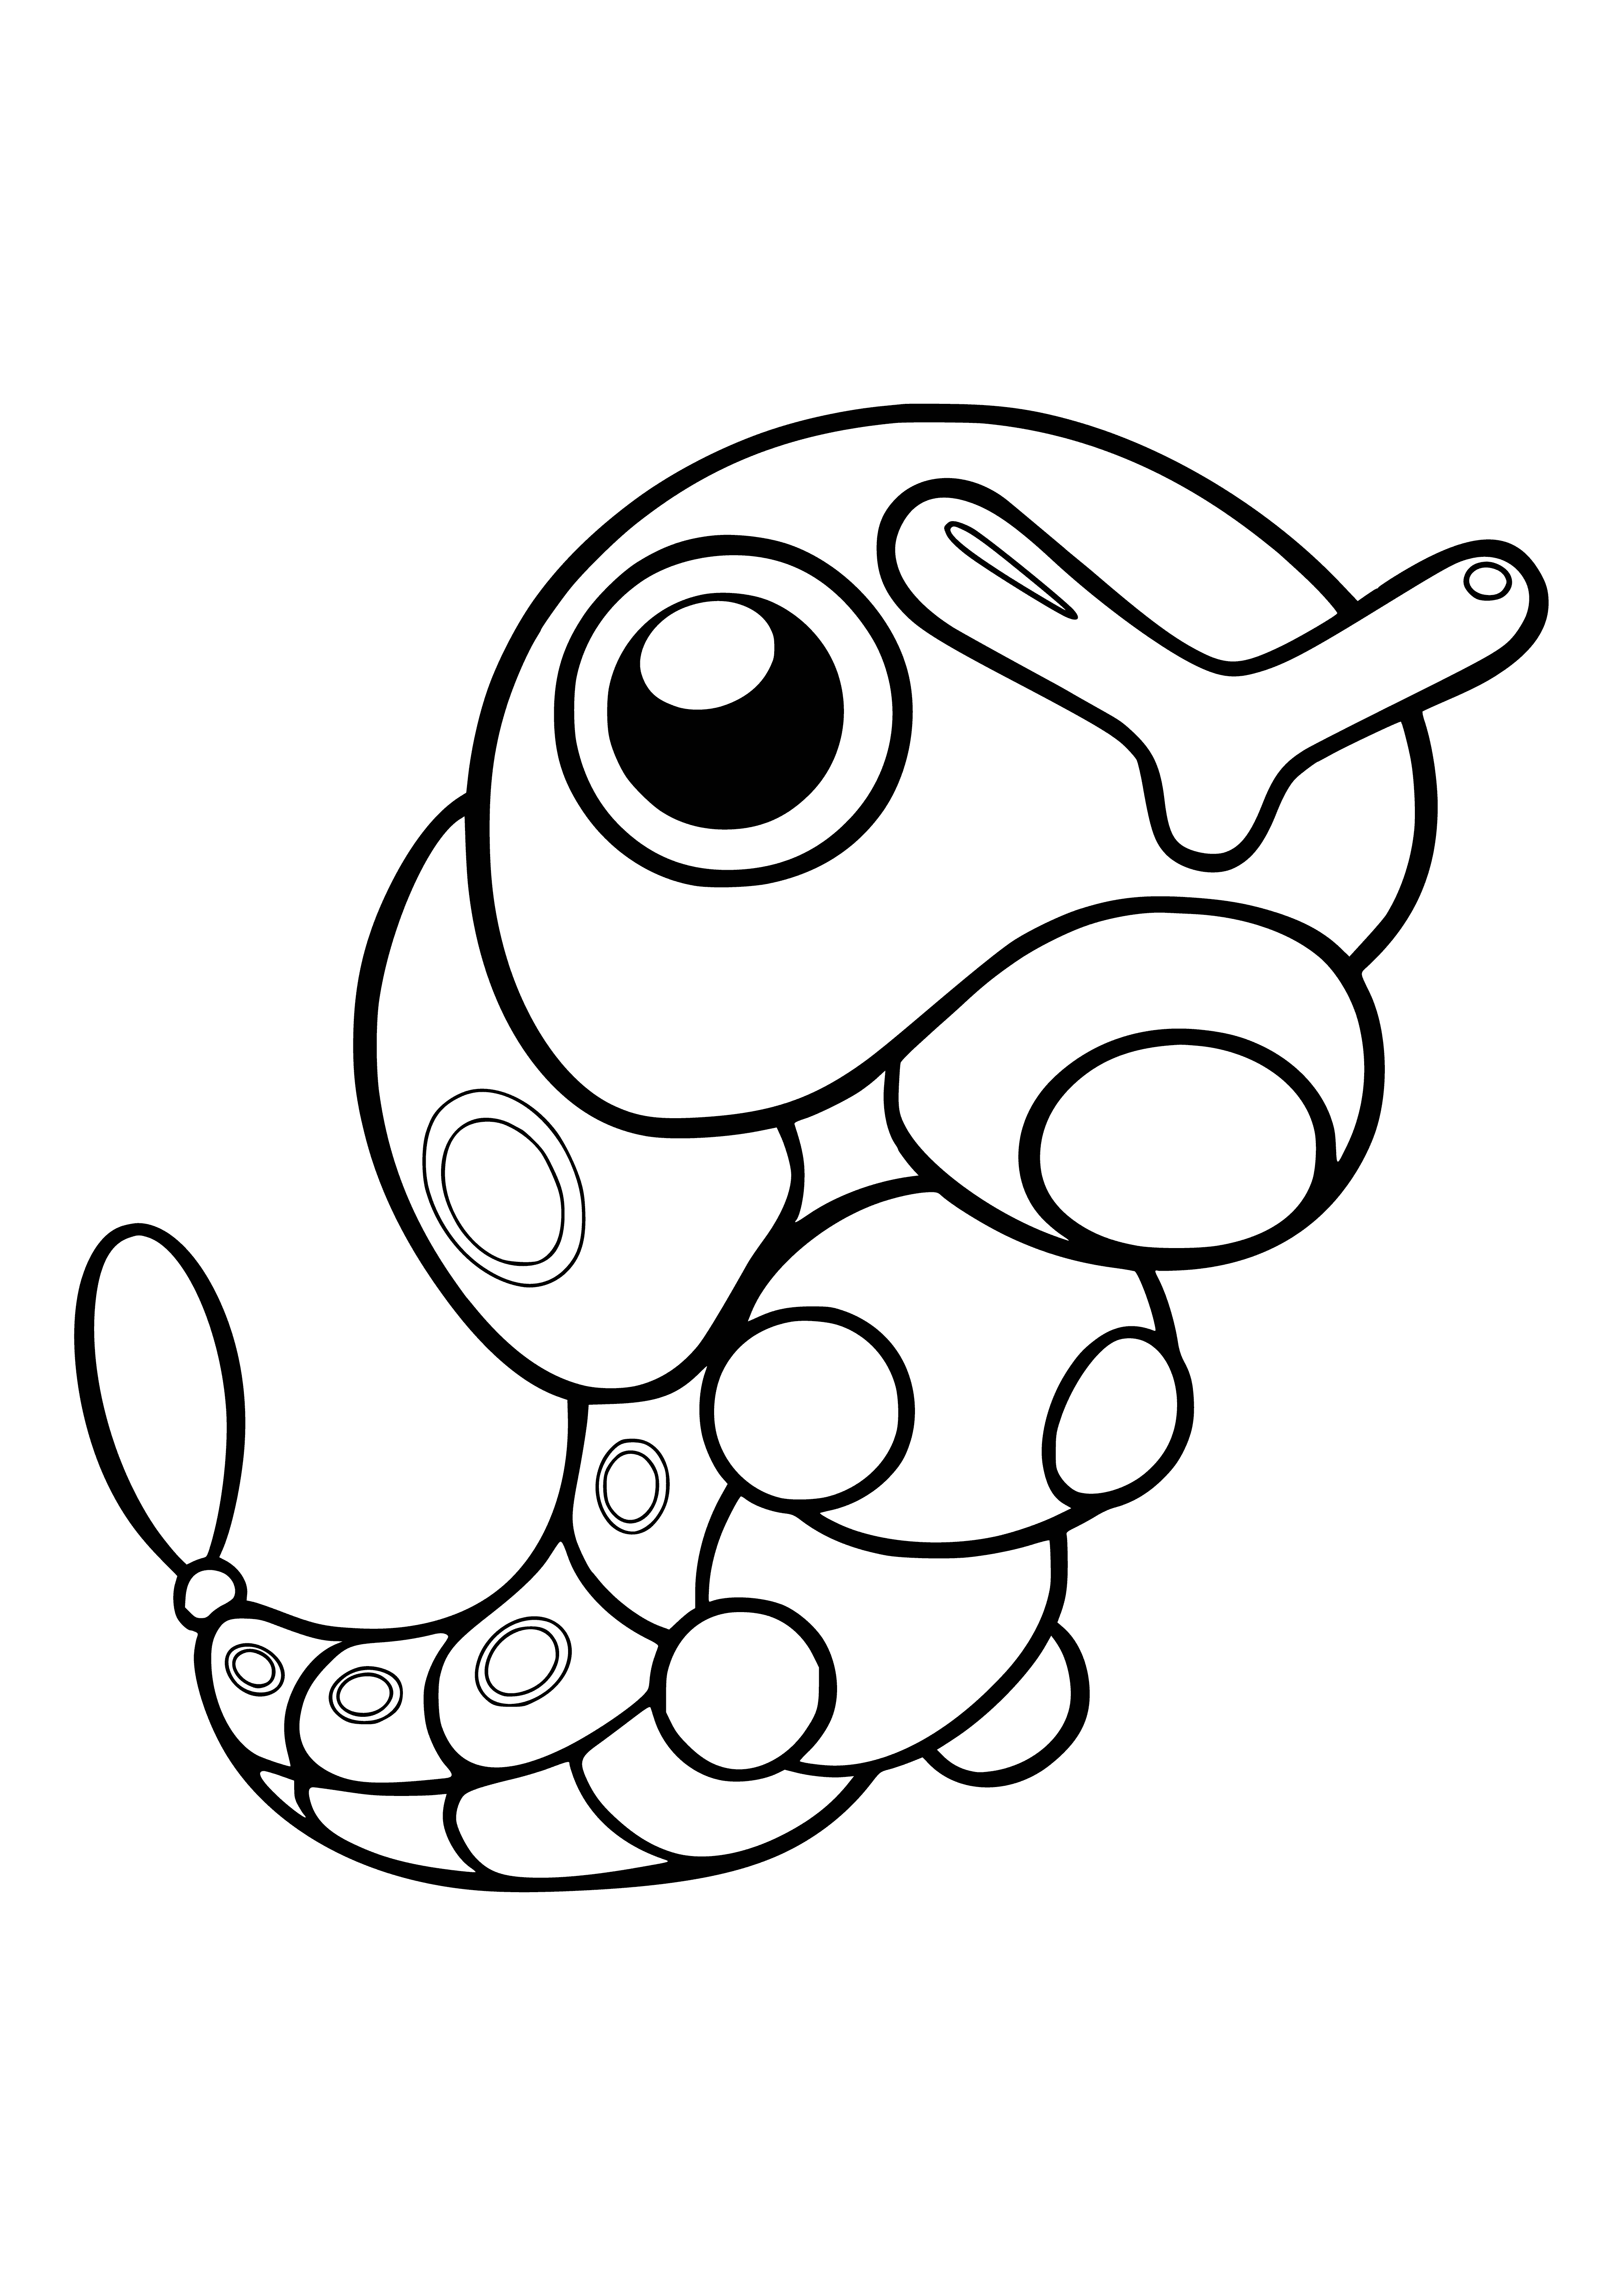 coloring page: Small bug-type Pokémon, Caterpie is mostly green with white spots. Evolves into Metapod. Has two feelers, six legs, segmented body & small black tail.